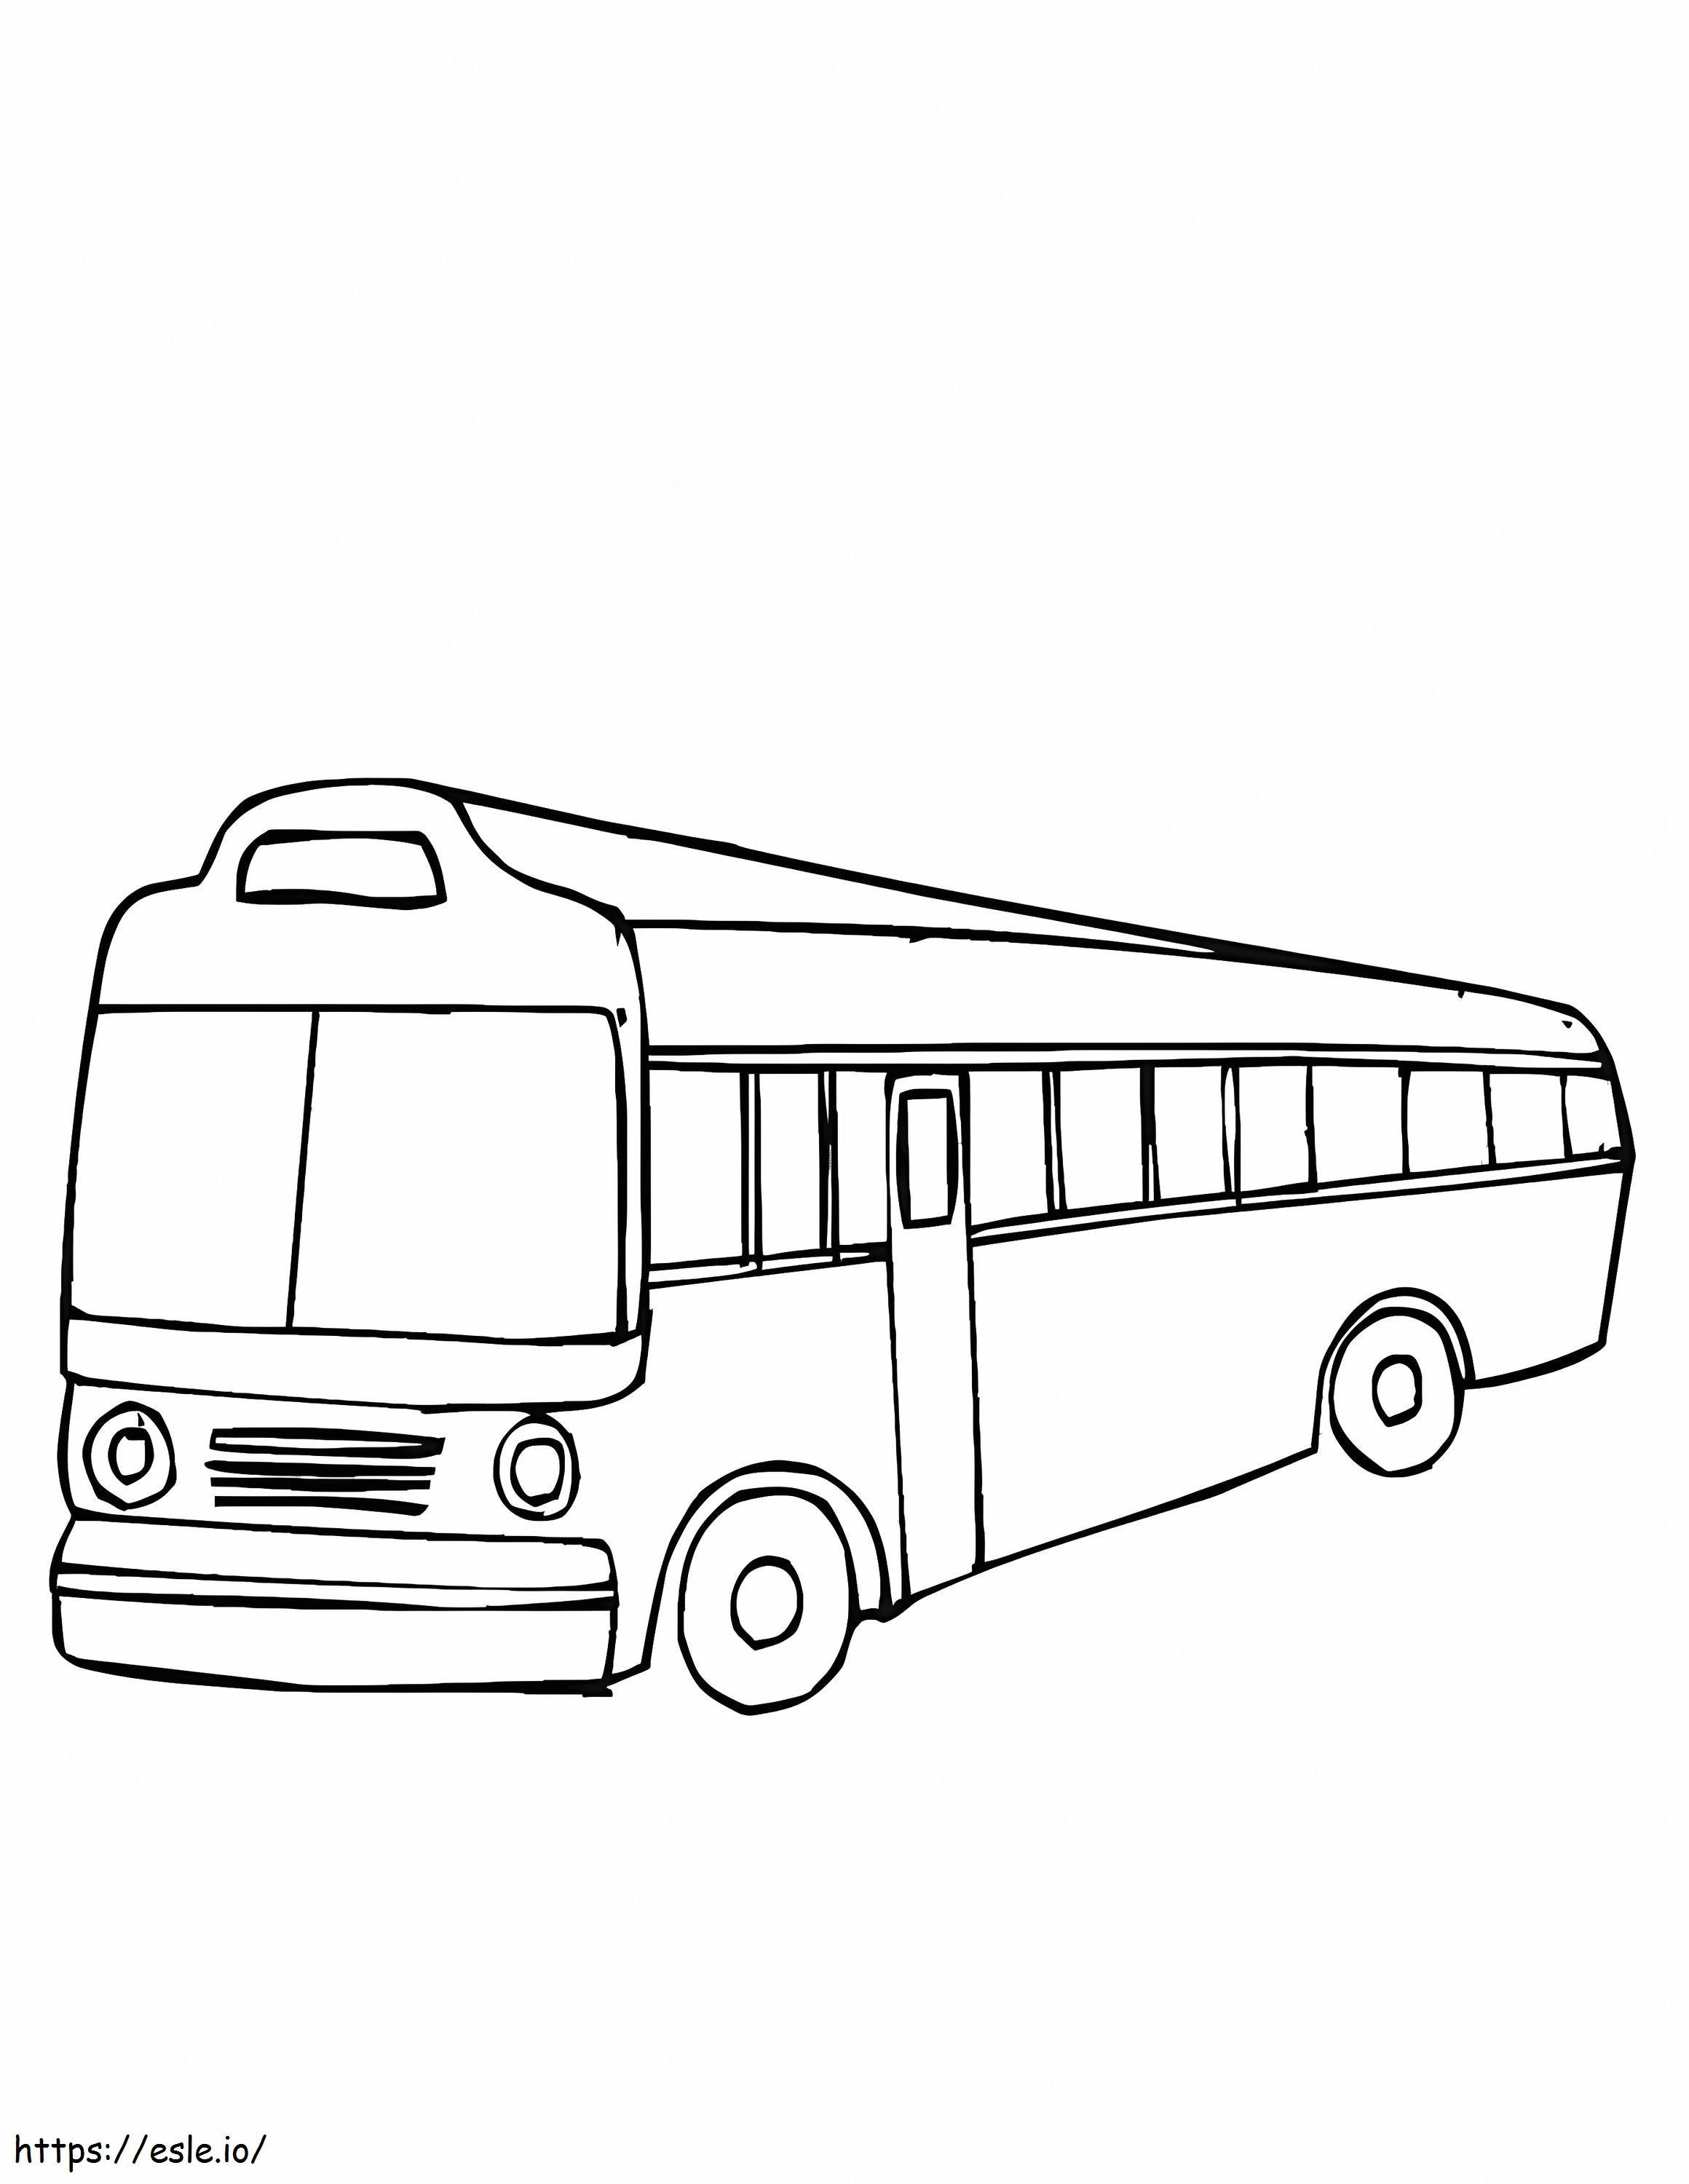 Bus Simple coloring page